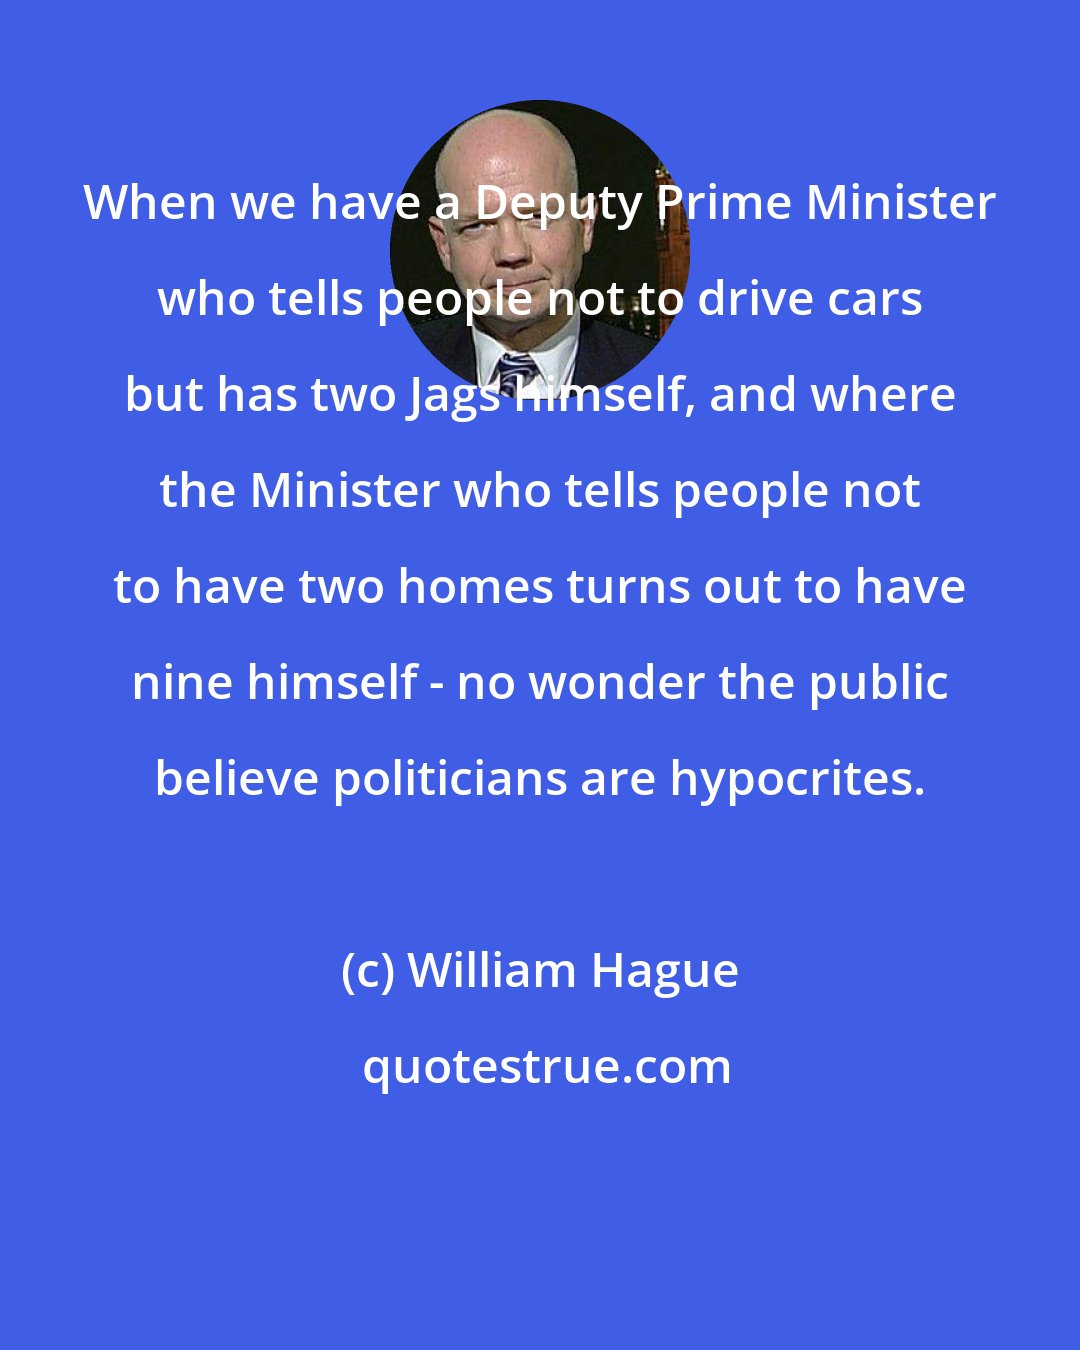 William Hague: When we have a Deputy Prime Minister who tells people not to drive cars but has two Jags himself, and where the Minister who tells people not to have two homes turns out to have nine himself - no wonder the public believe politicians are hypocrites.